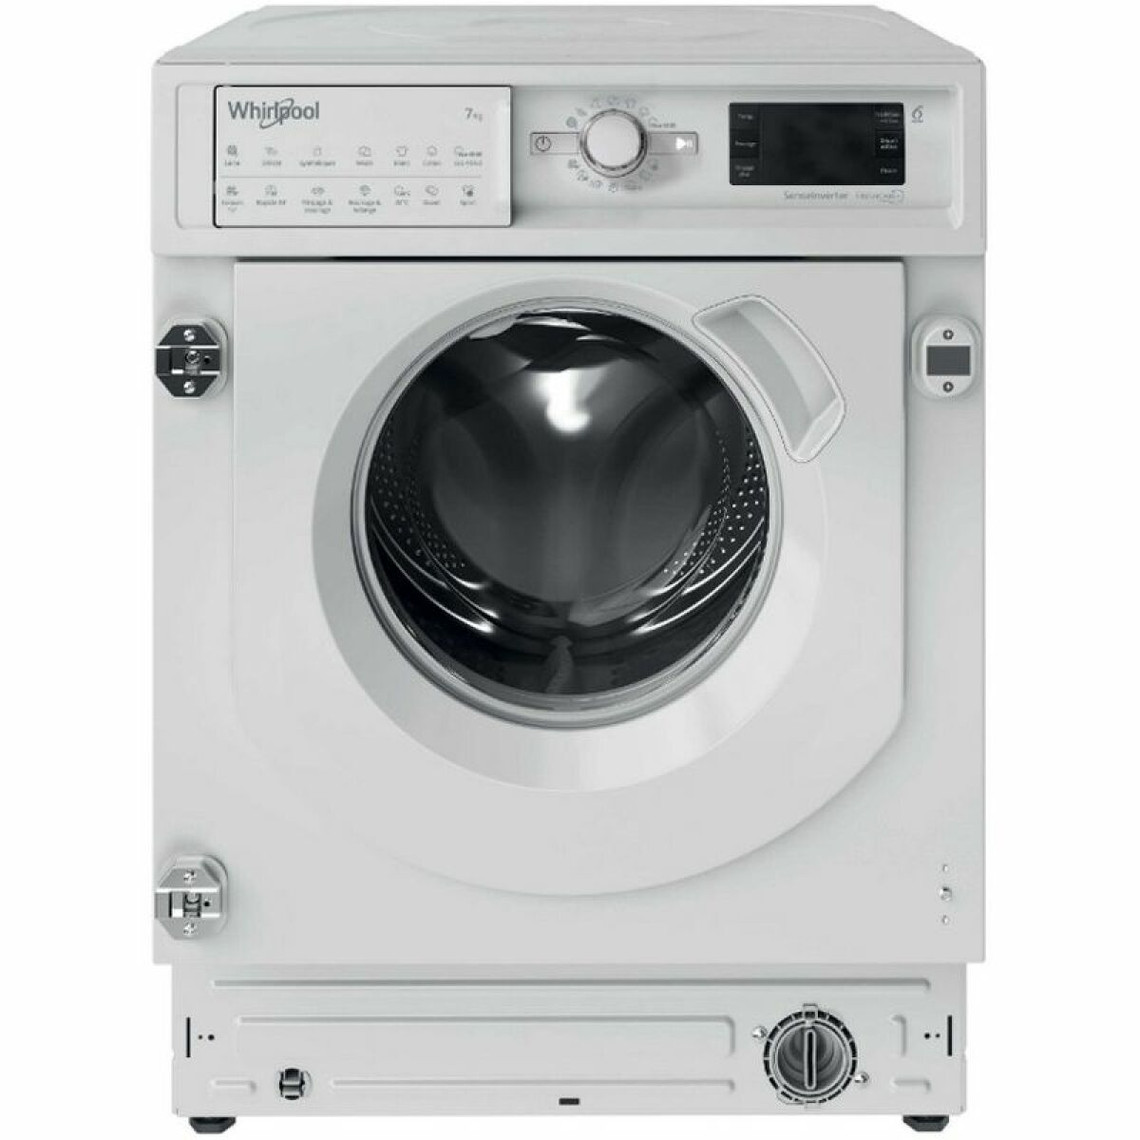 Whirlpool Lave-linge intégrable 7 kg 1400 tours/min - biwmwg71483frn - WHIRLPOOL